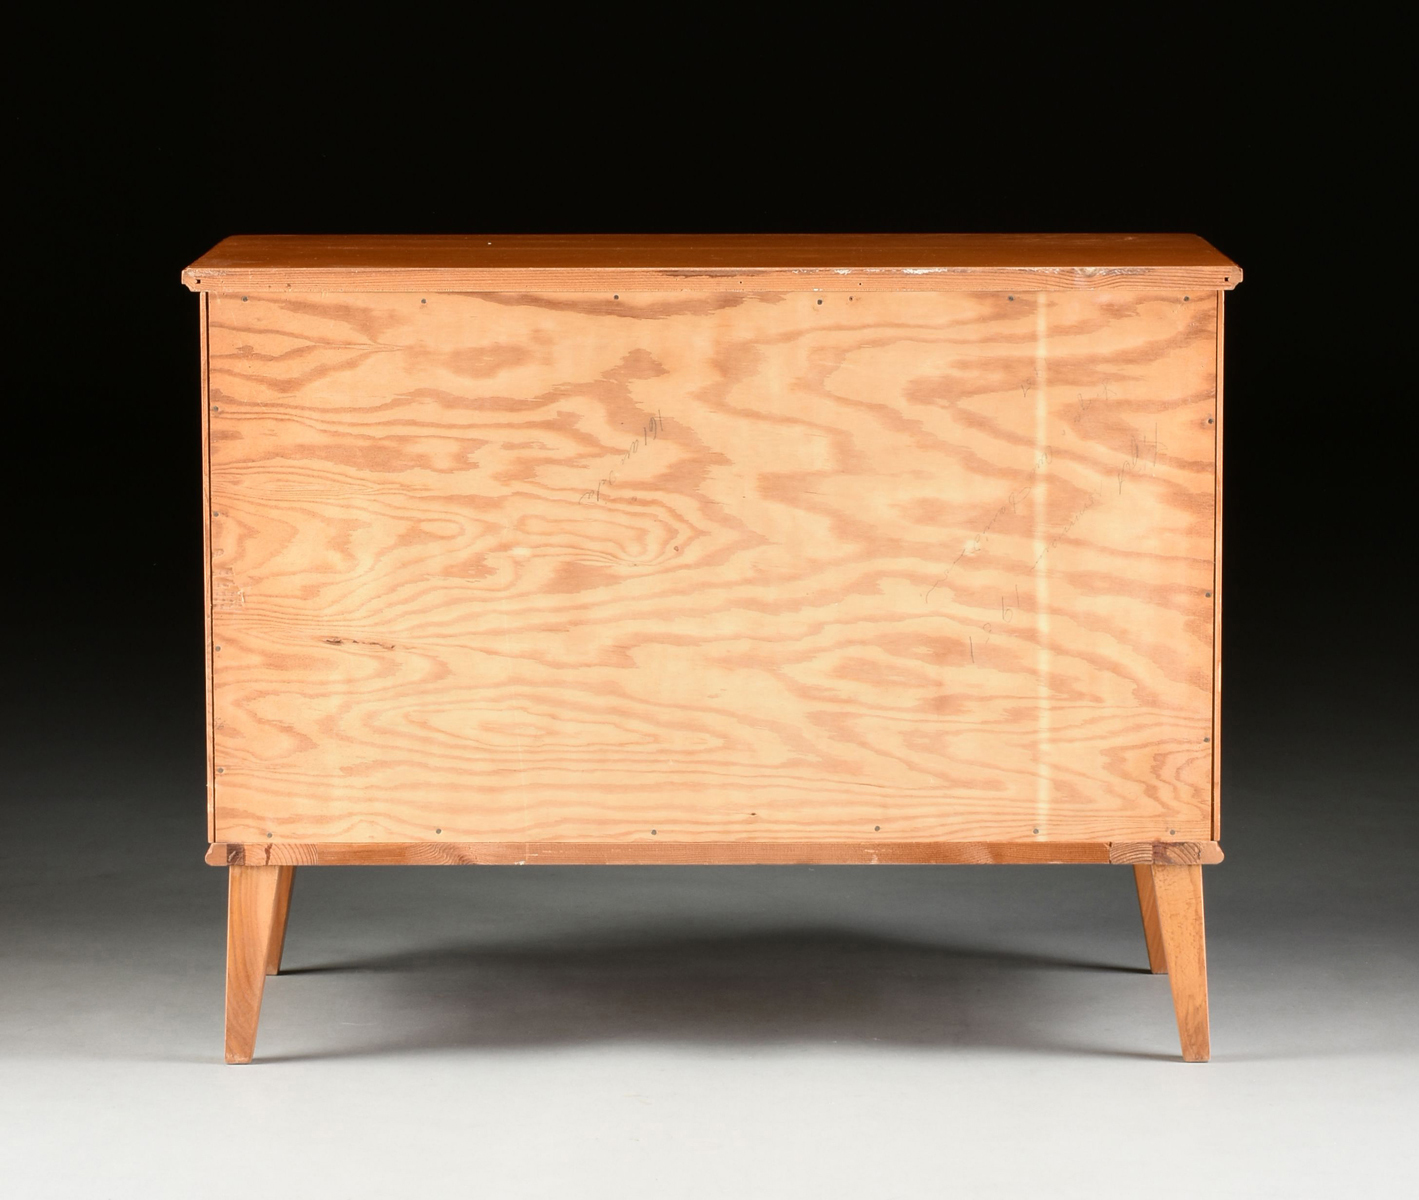 A MID-CENTURY MODERN MARQUETRY INLAID BIRCH CHEST OF DRAWERS, POSSIBLY SCANDINAVIAN, SIGNED, 1951, - Image 8 of 8